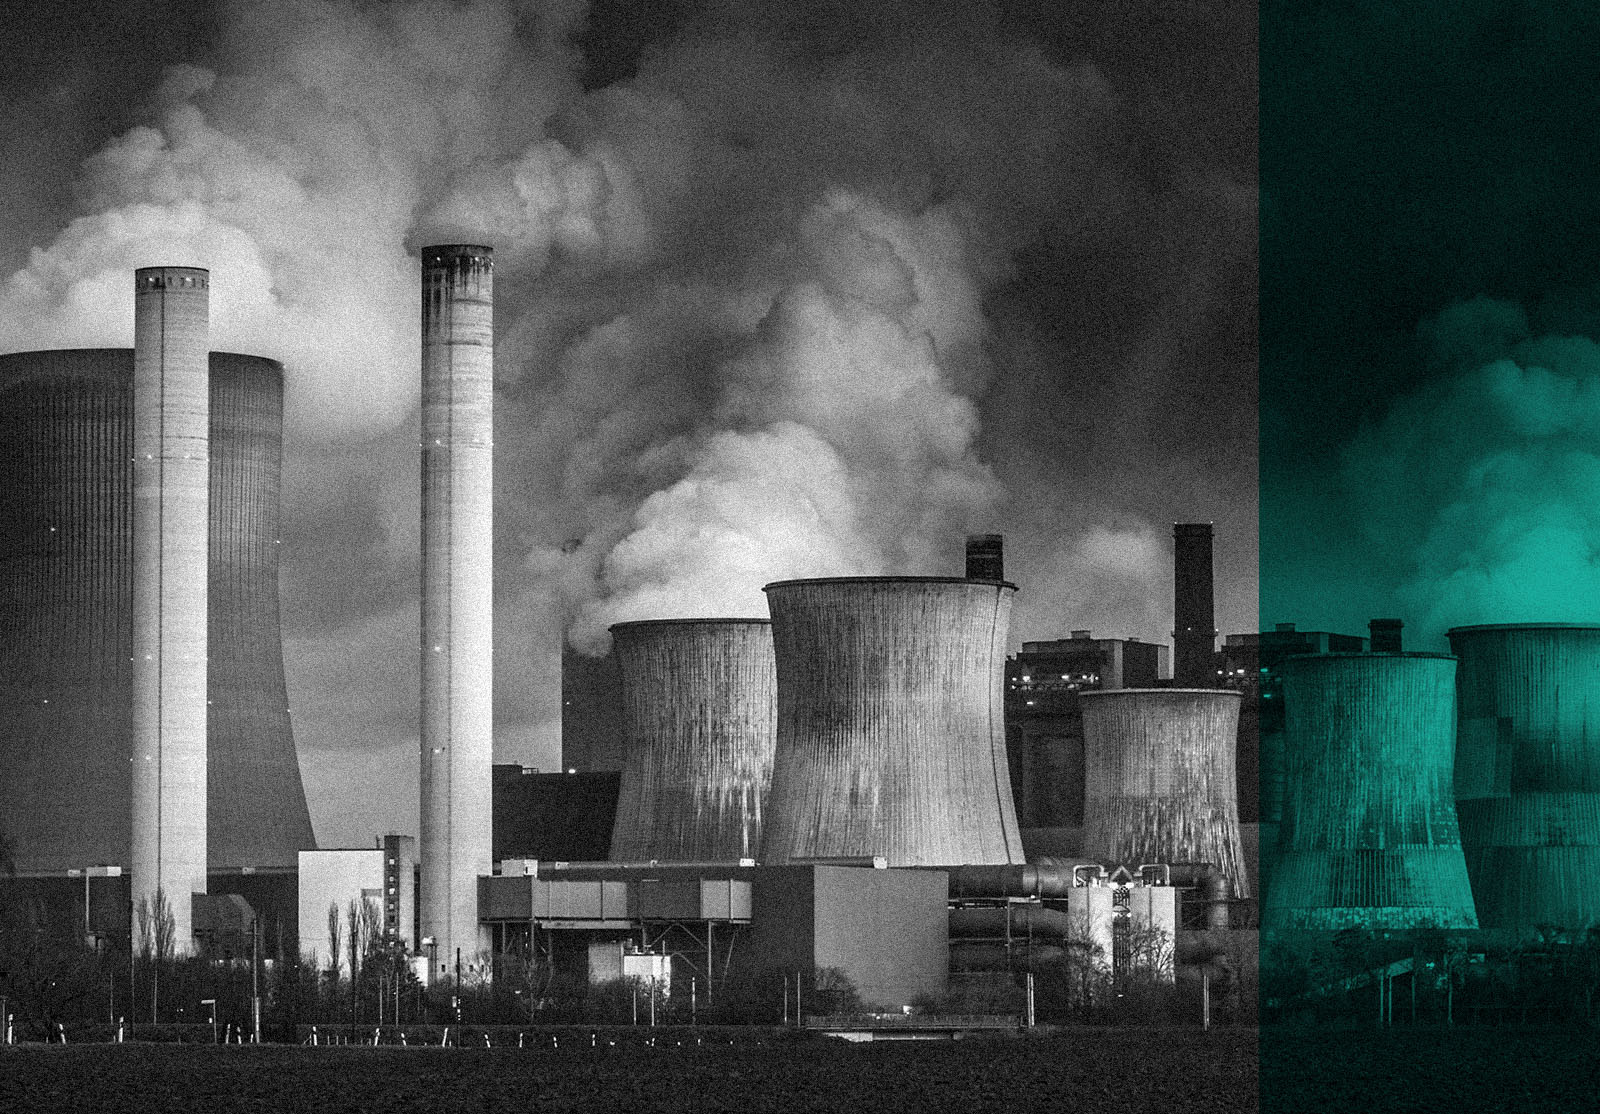 Chimneys and cooling towers from a coal fired power station releasing smoke into the atmosphere.